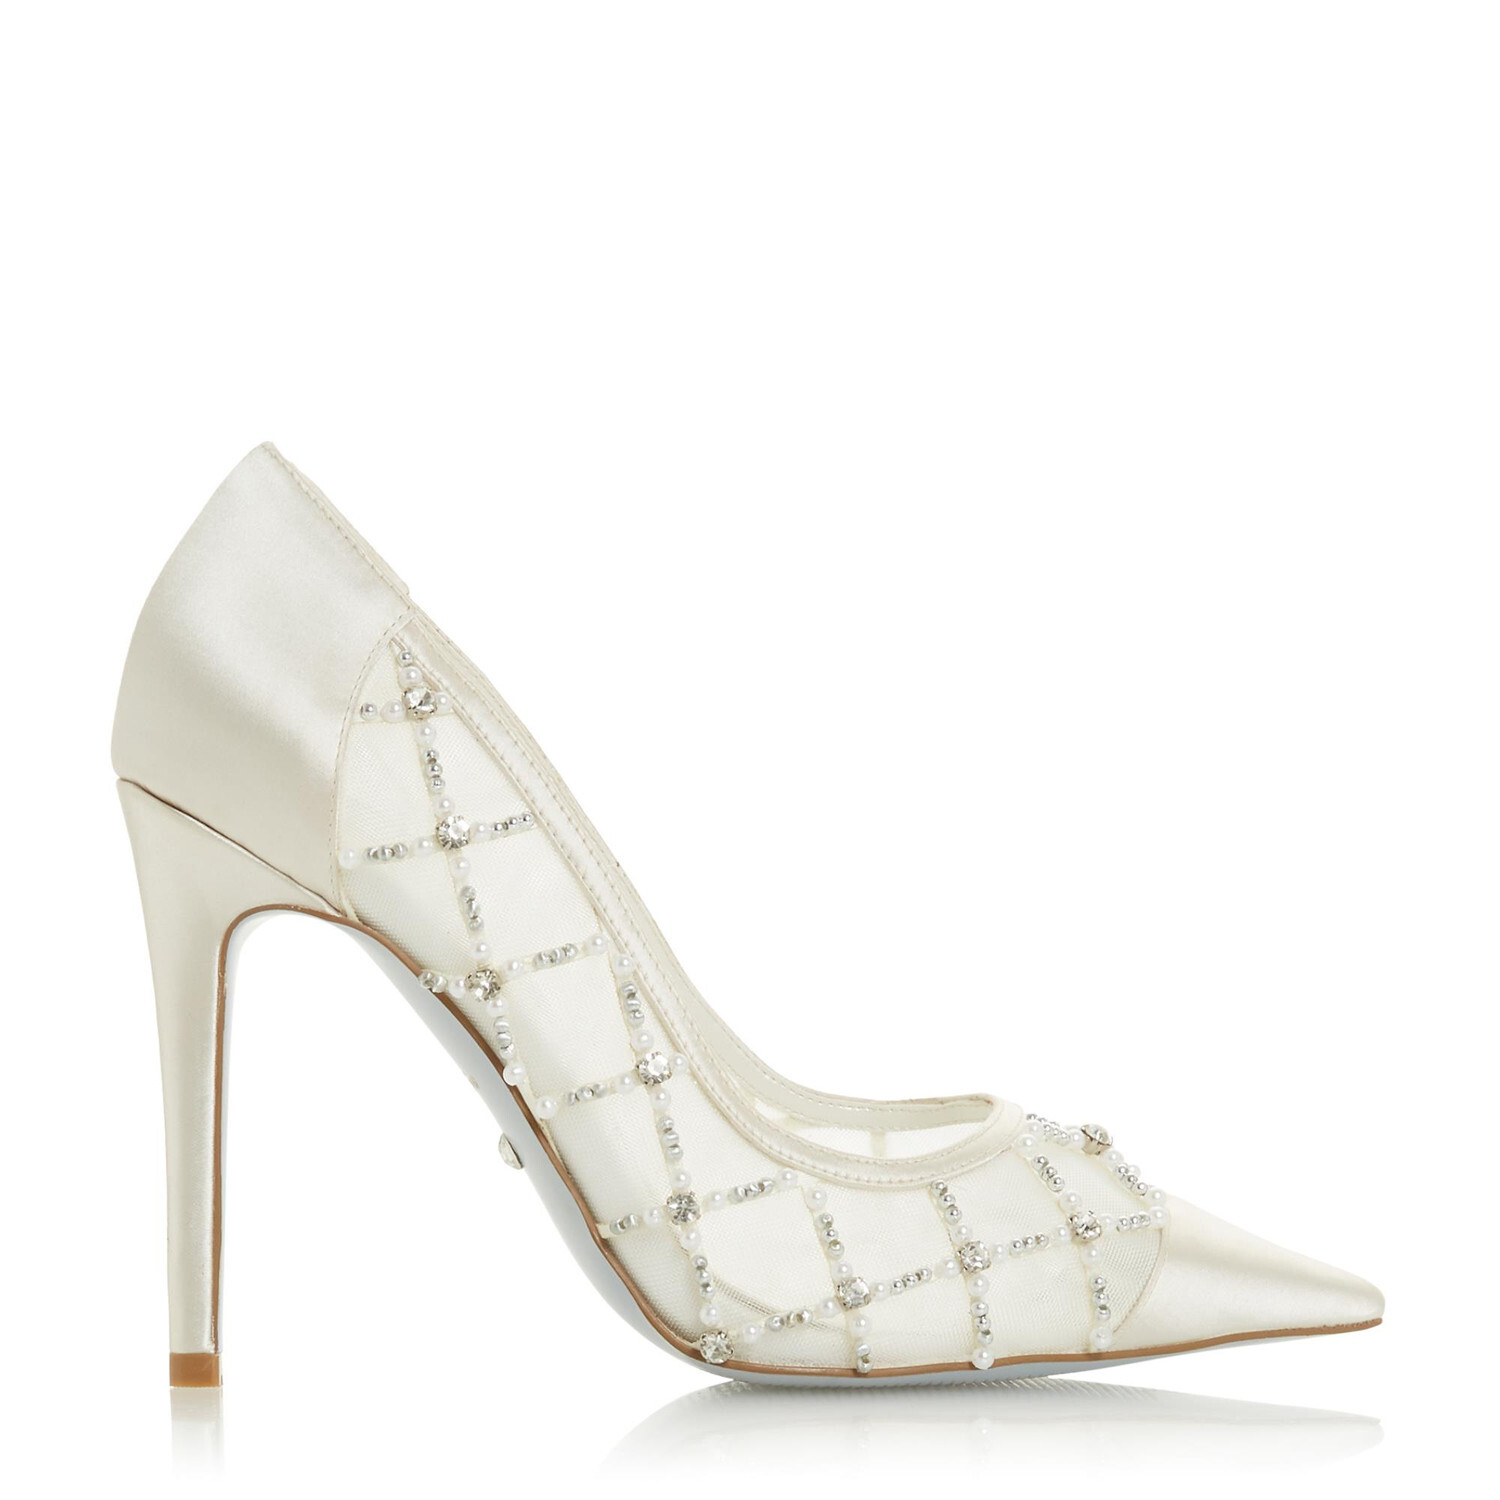 Ballgown Wedding Shoes from Dune London - hitched.co.uk